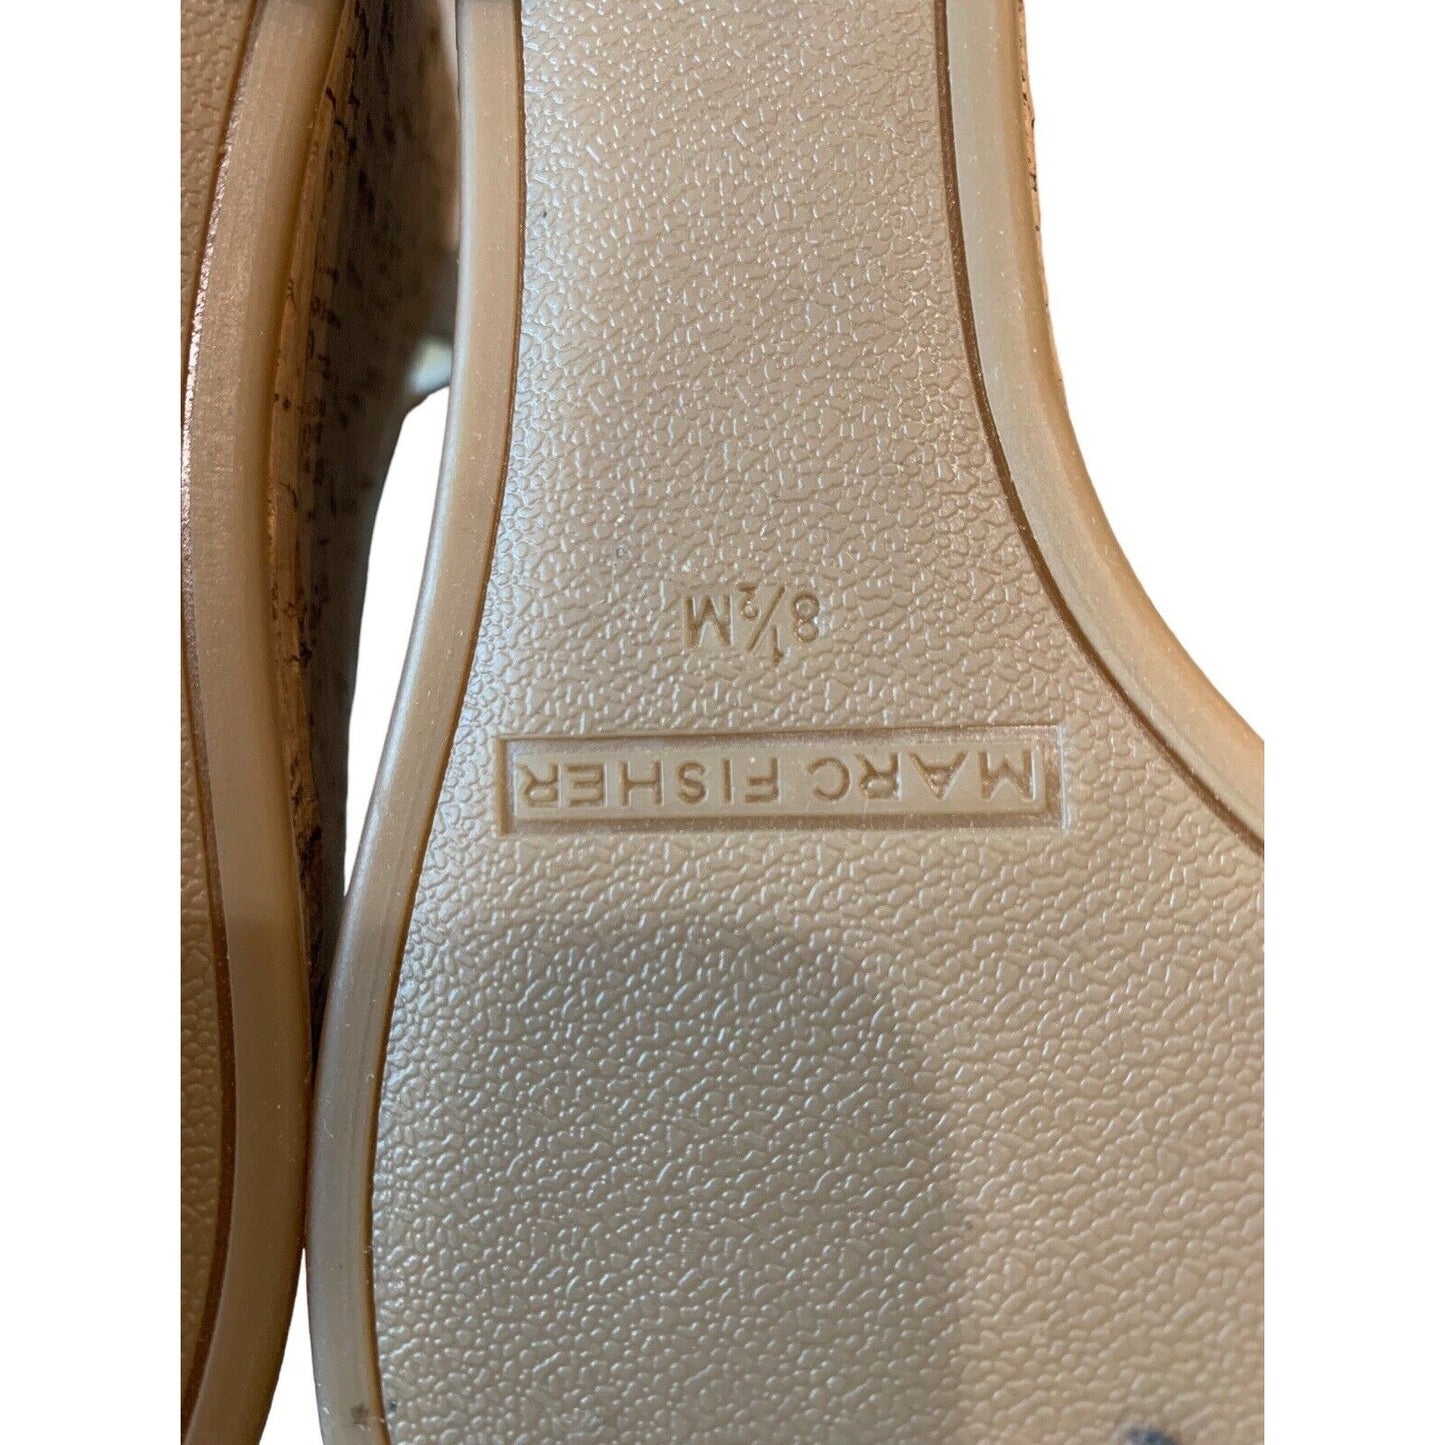 Closeup Of Undersole With Brand and Size Info